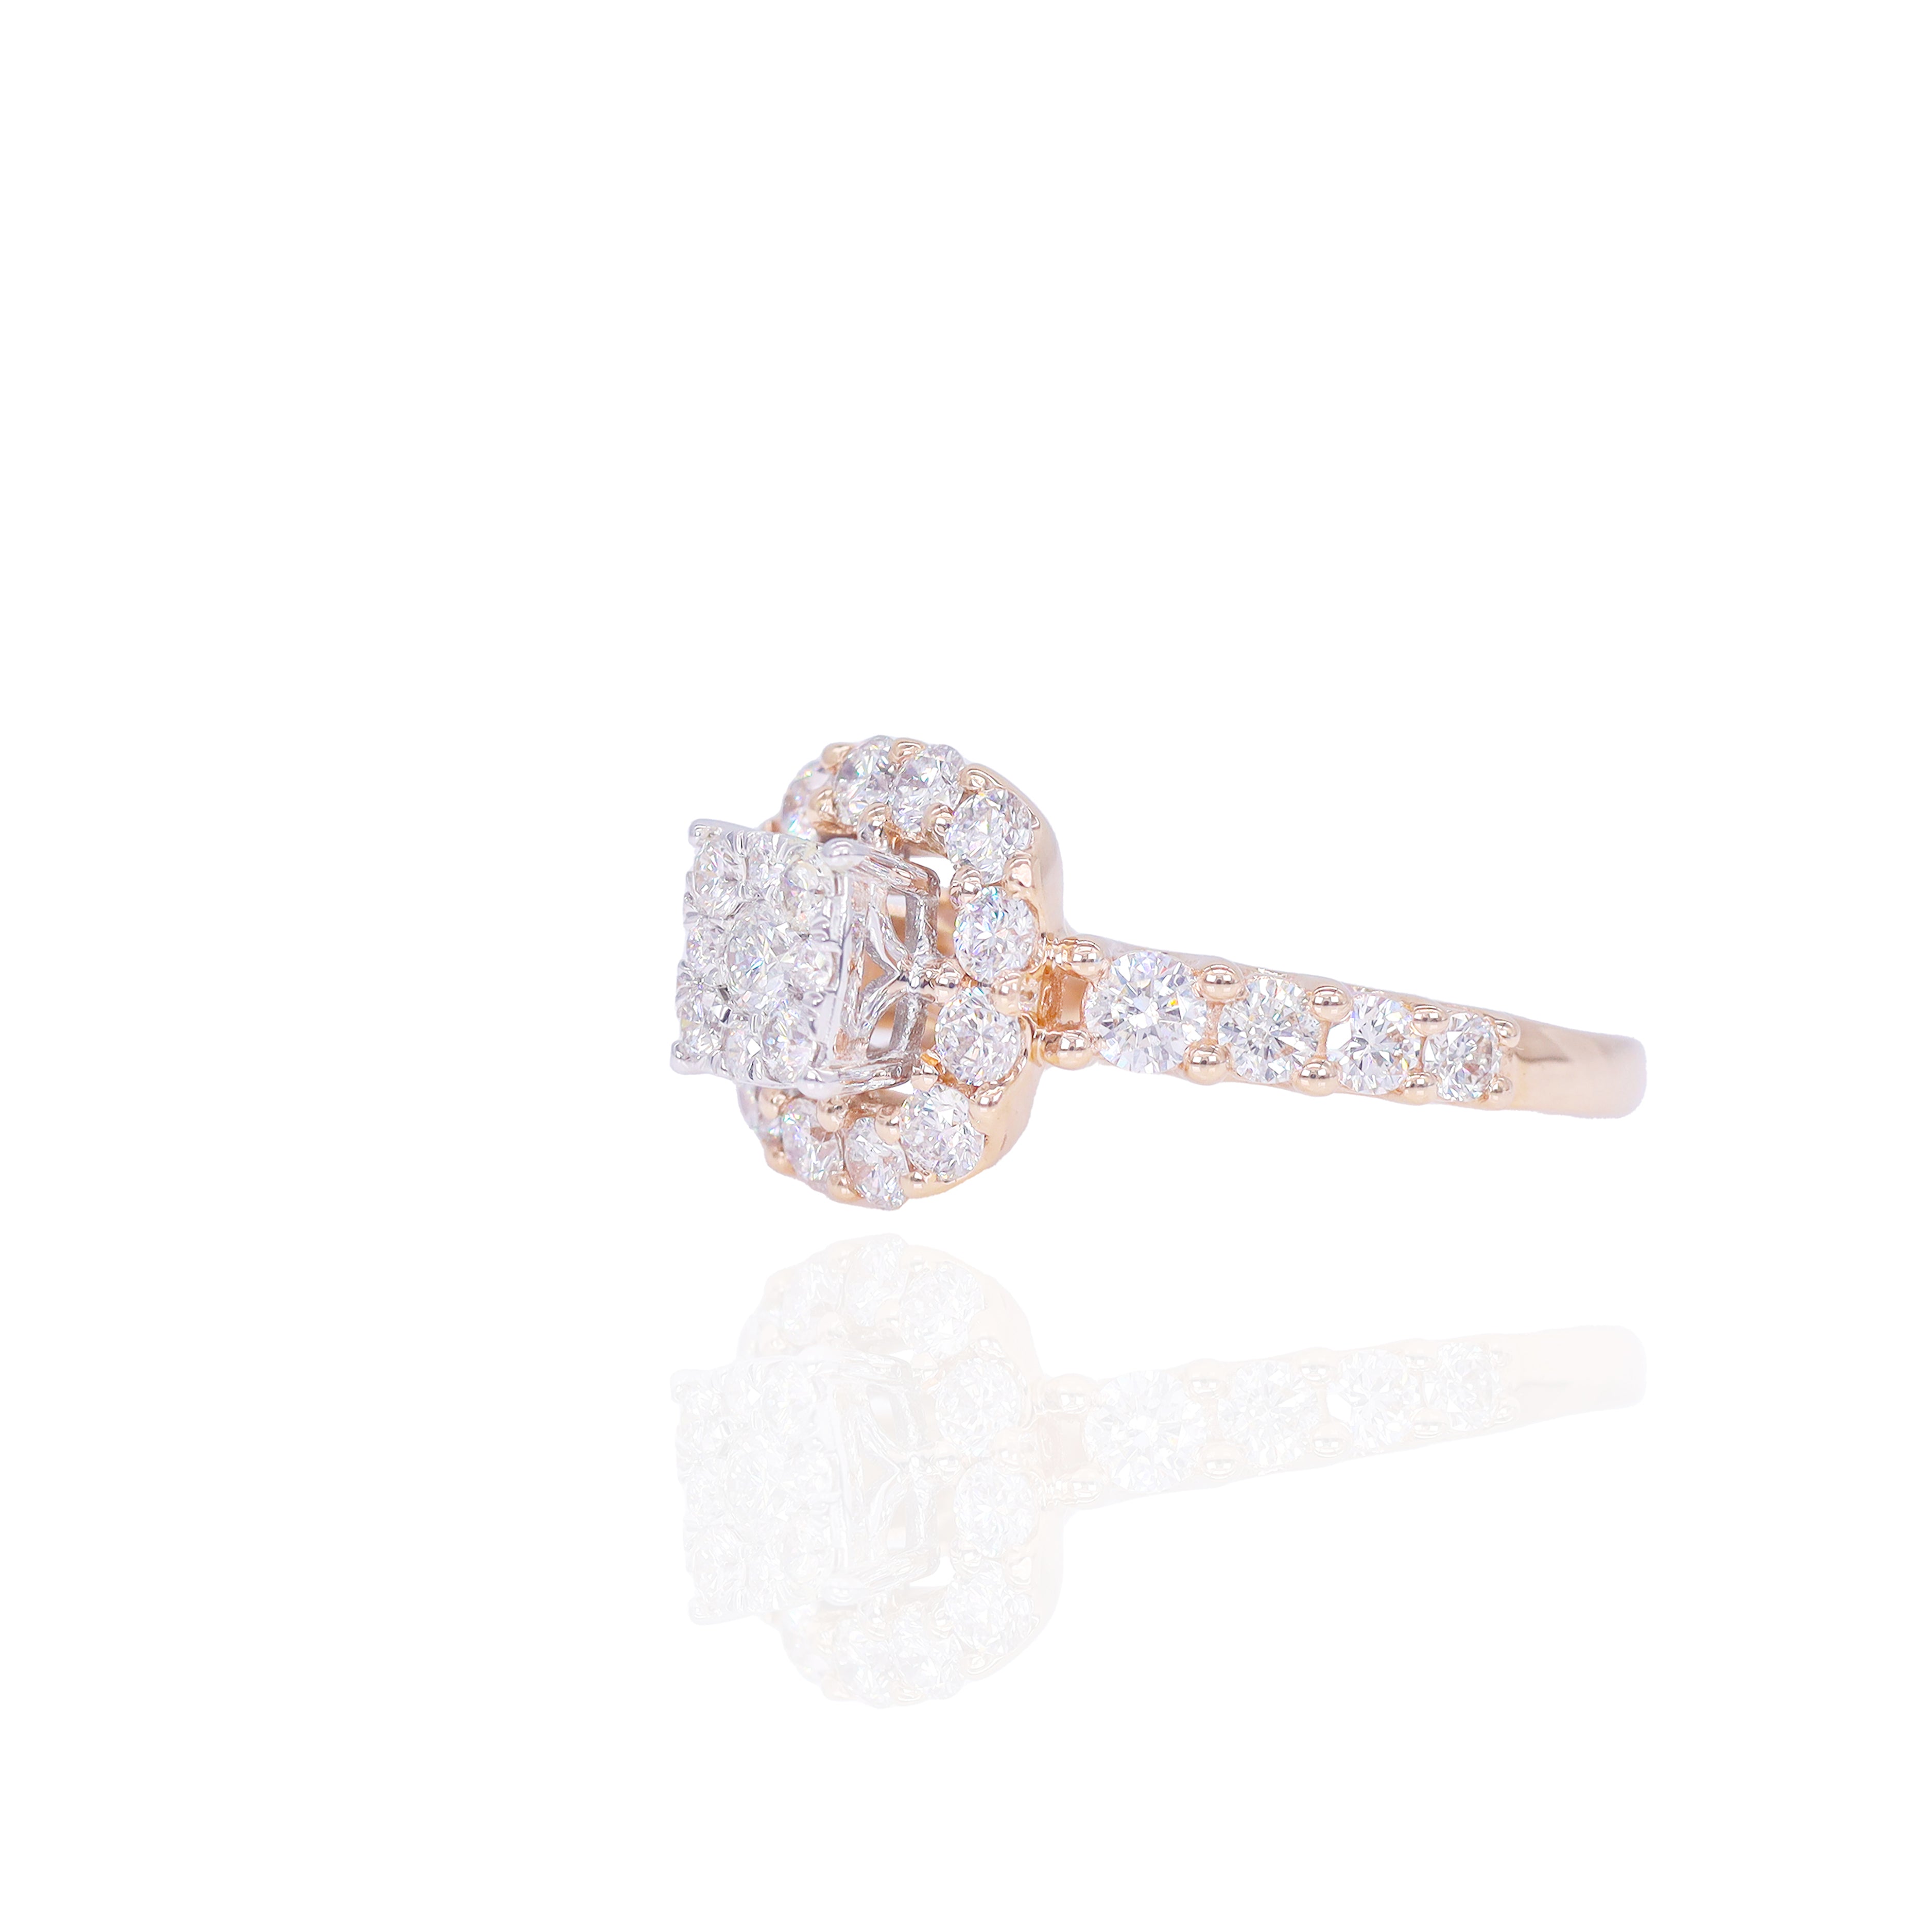 Square Shaped with Halo Two Tone Diamond Engagement Ring